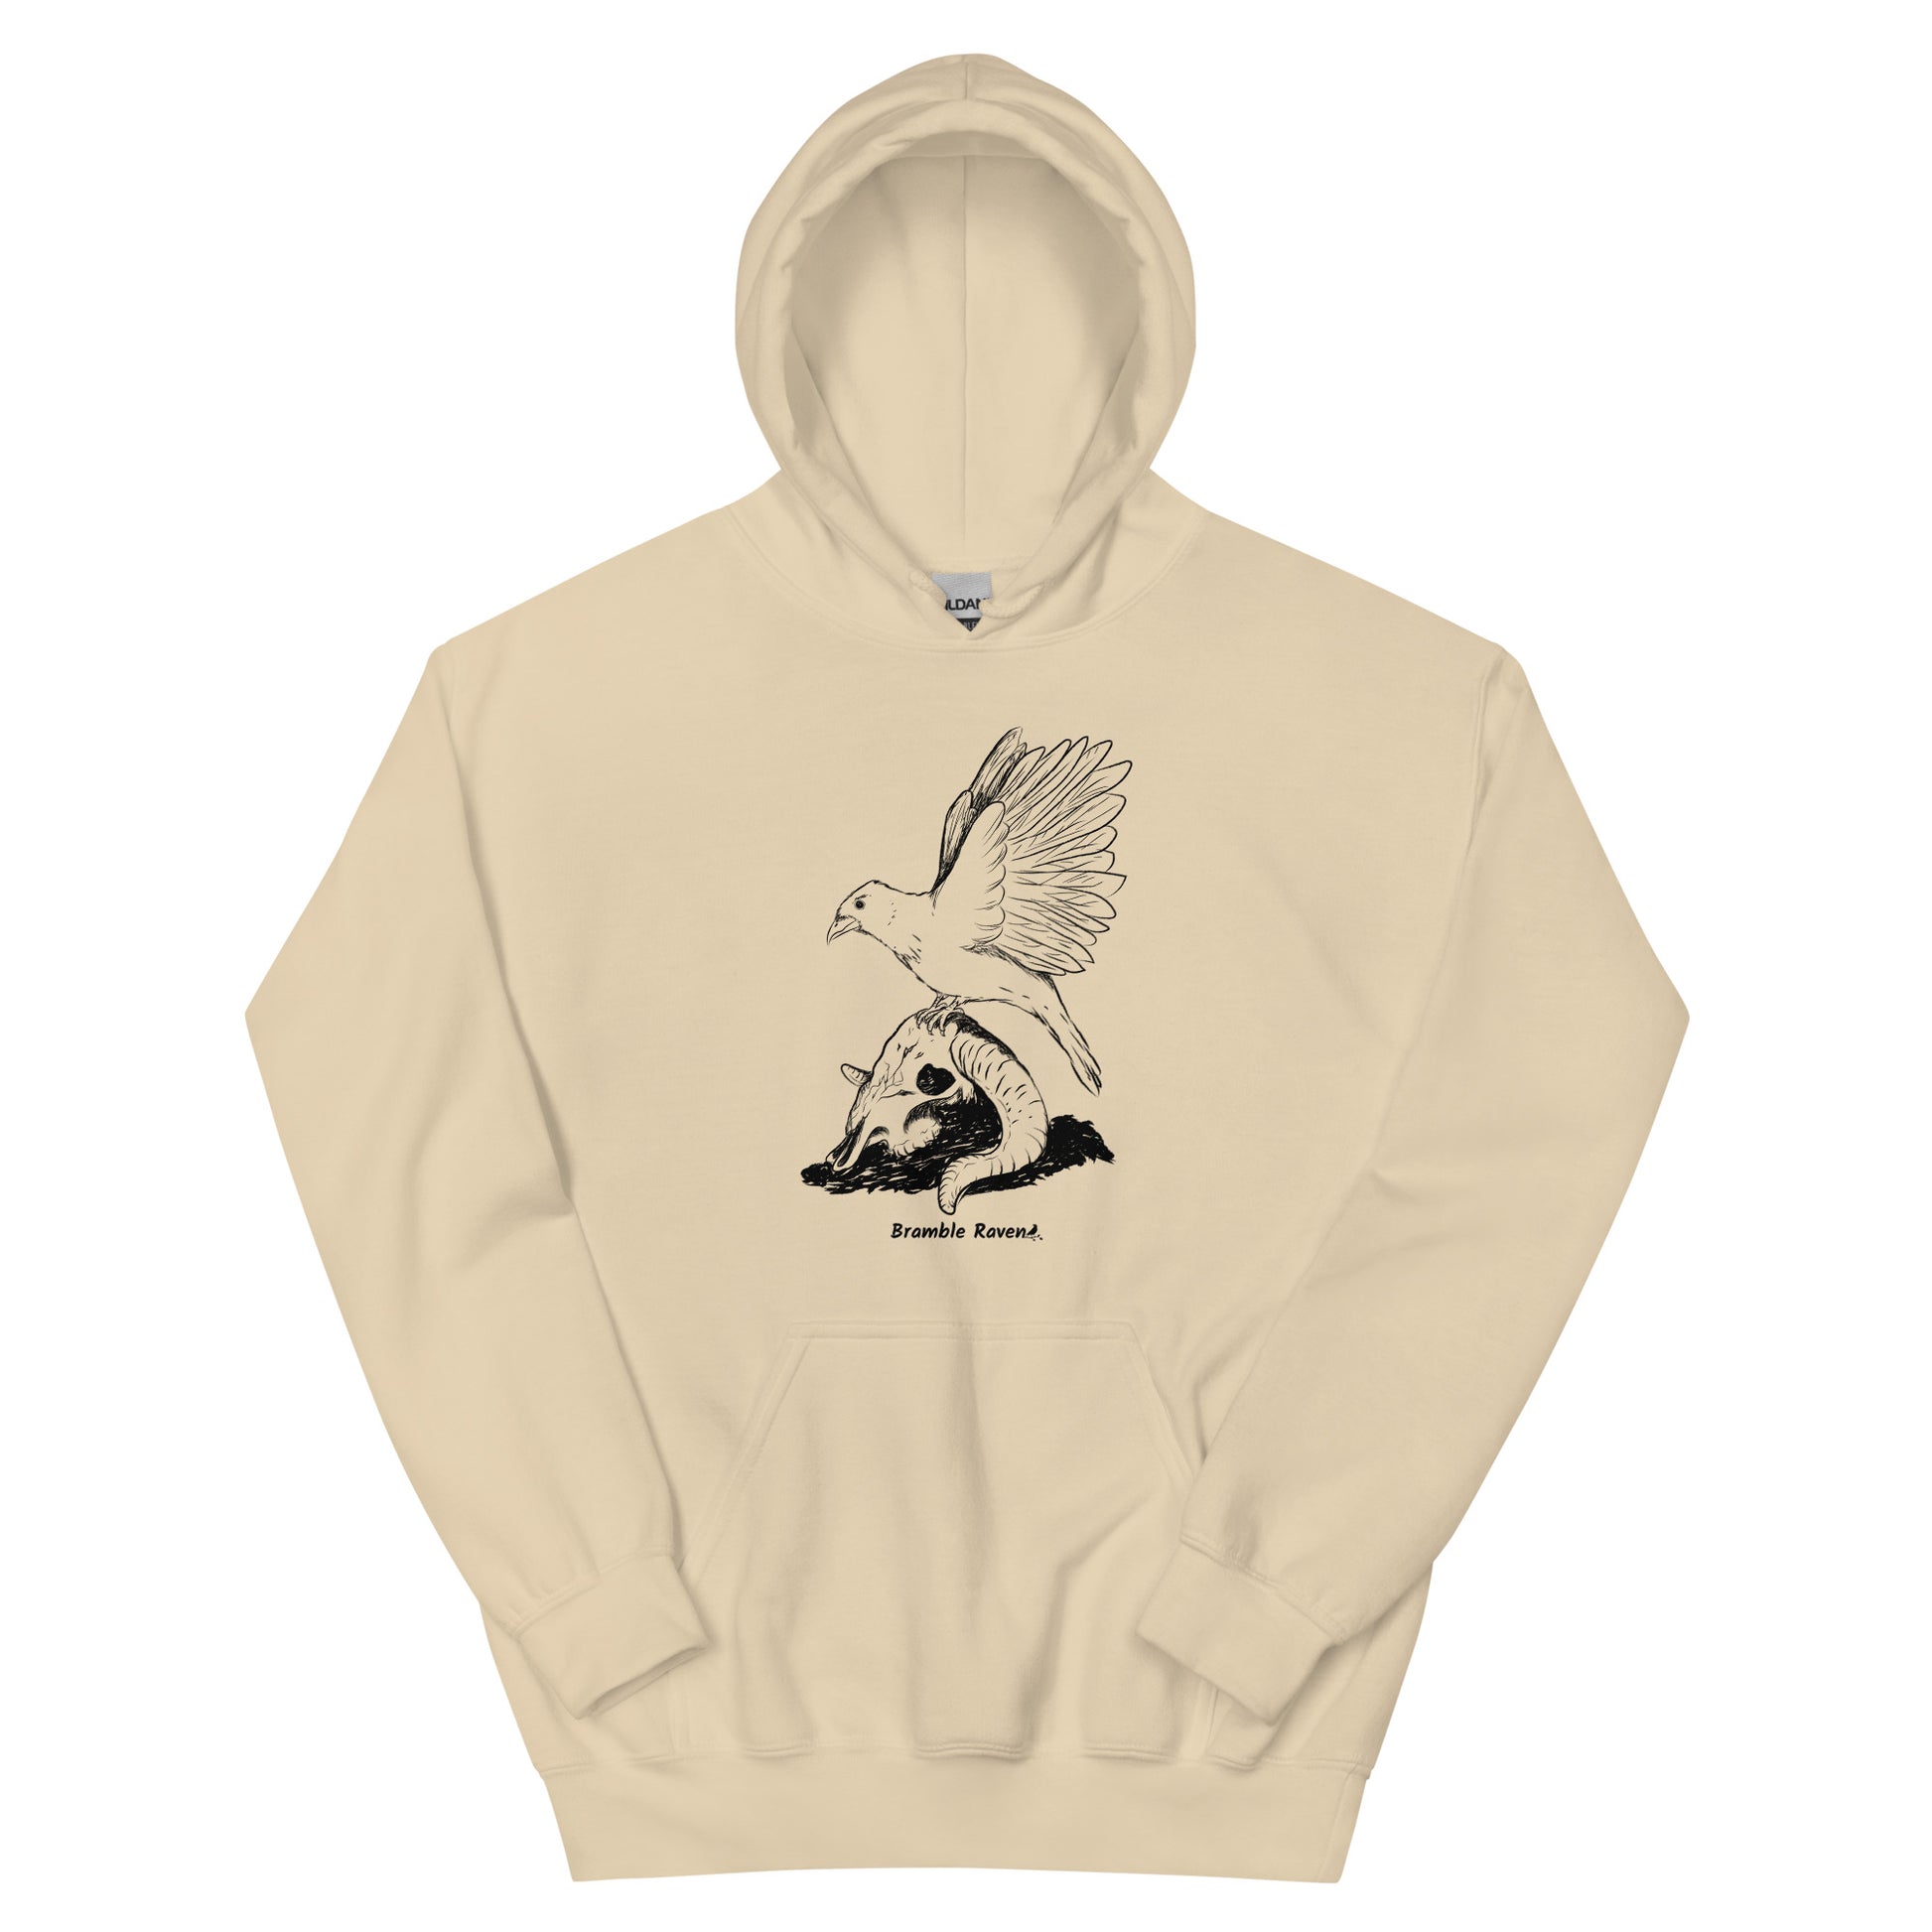 Sand colored unisex Reflections hoodie. Features image of a crow with wings outstretched sitting on a sheep skull.  Has a front pouch pocket and double lined hood.